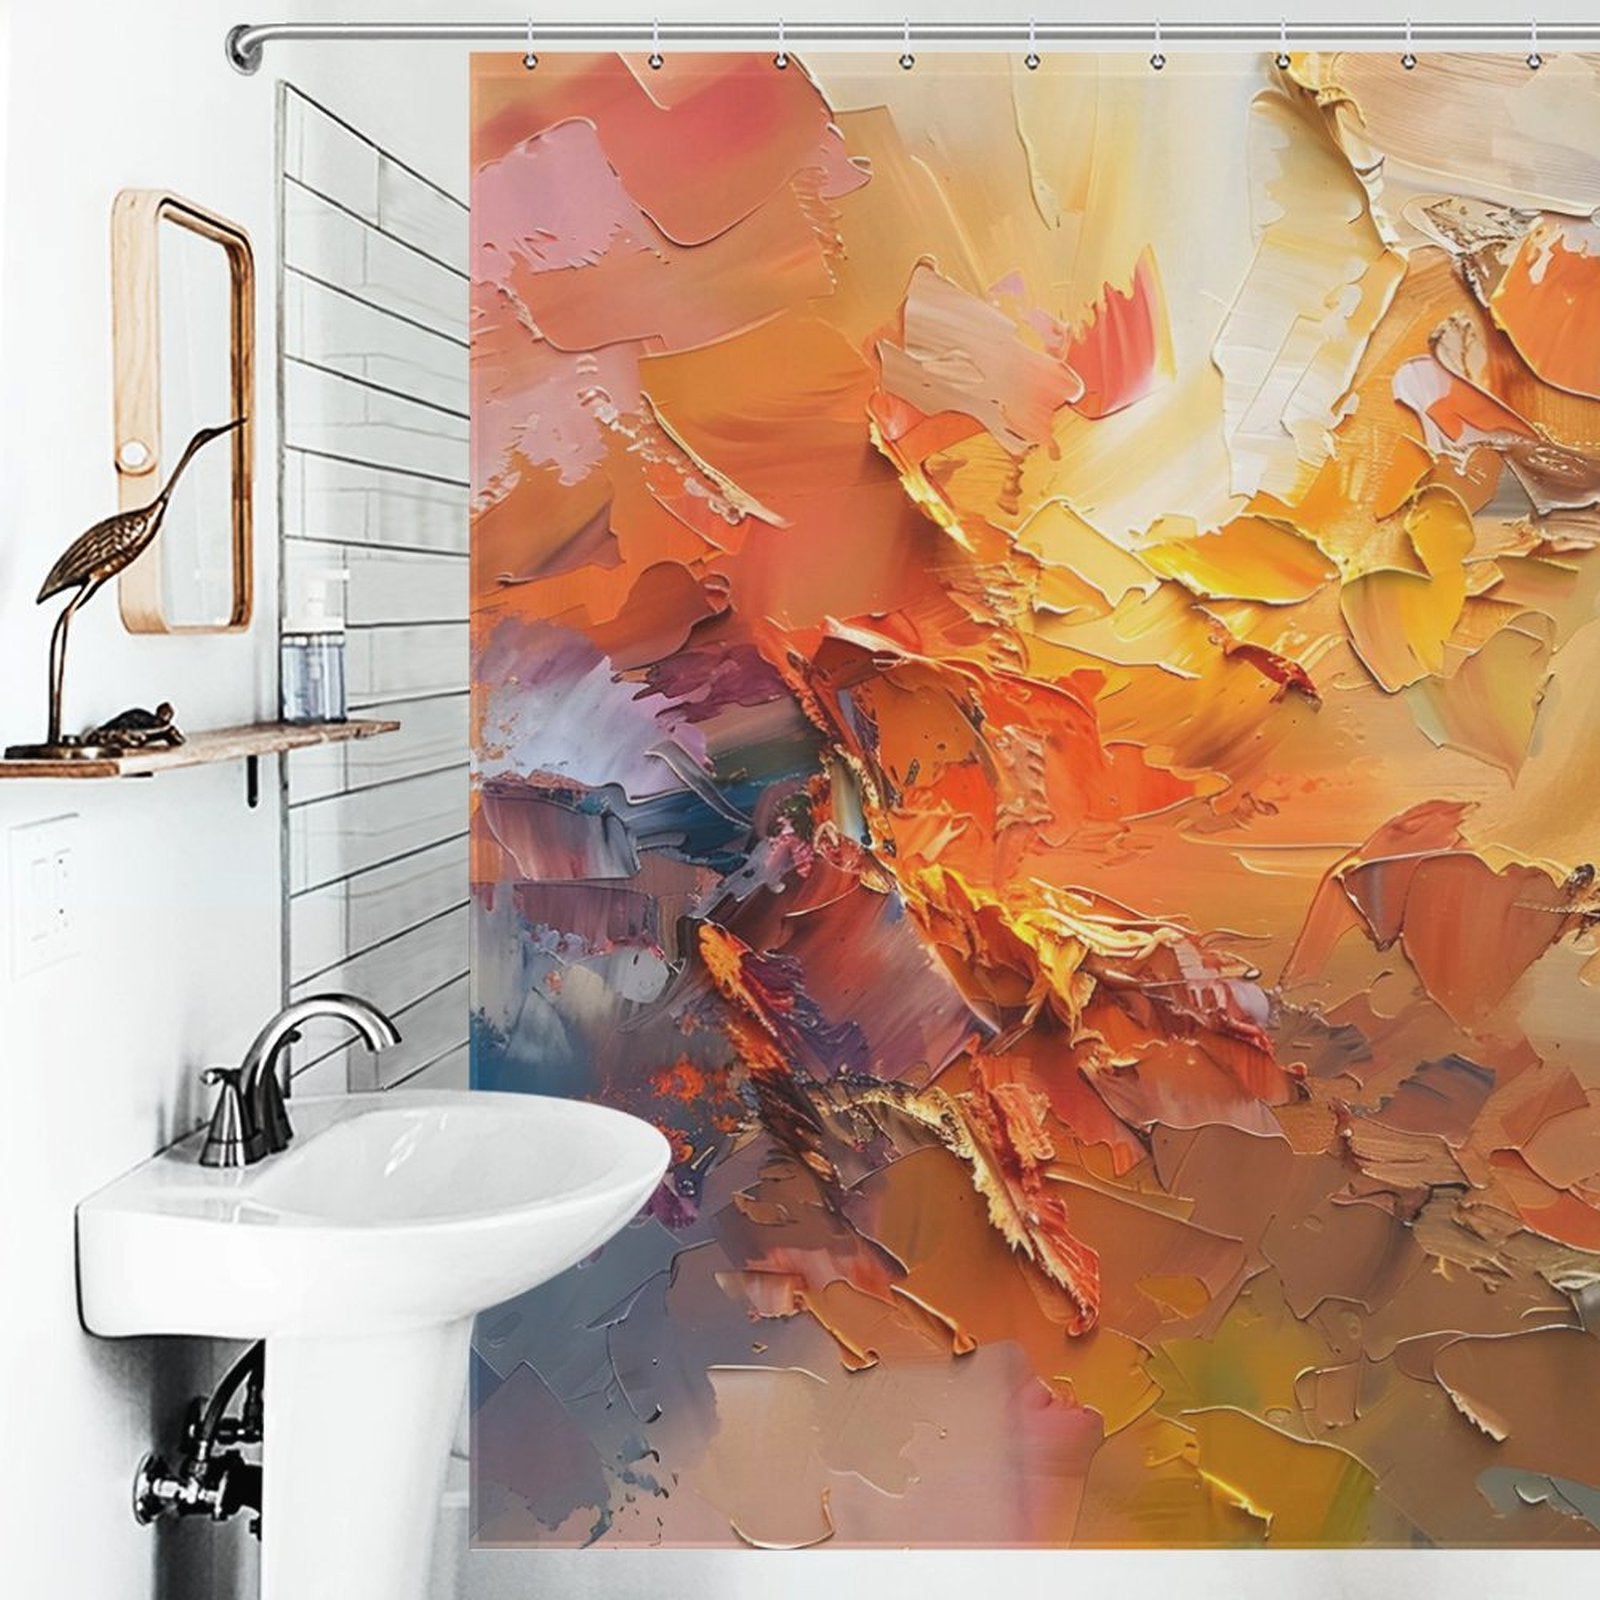 A bathroom with a white sink and modern faucet, a rectangular mirror mounted on a wooden shelf, and a colorful Cotton Cat Burnt Orange Abstract Oil Painting Modern Art Yellow Blue Brushstrokes Shower Curtain-Cottoncat that is waterproof and mildew-resistant.